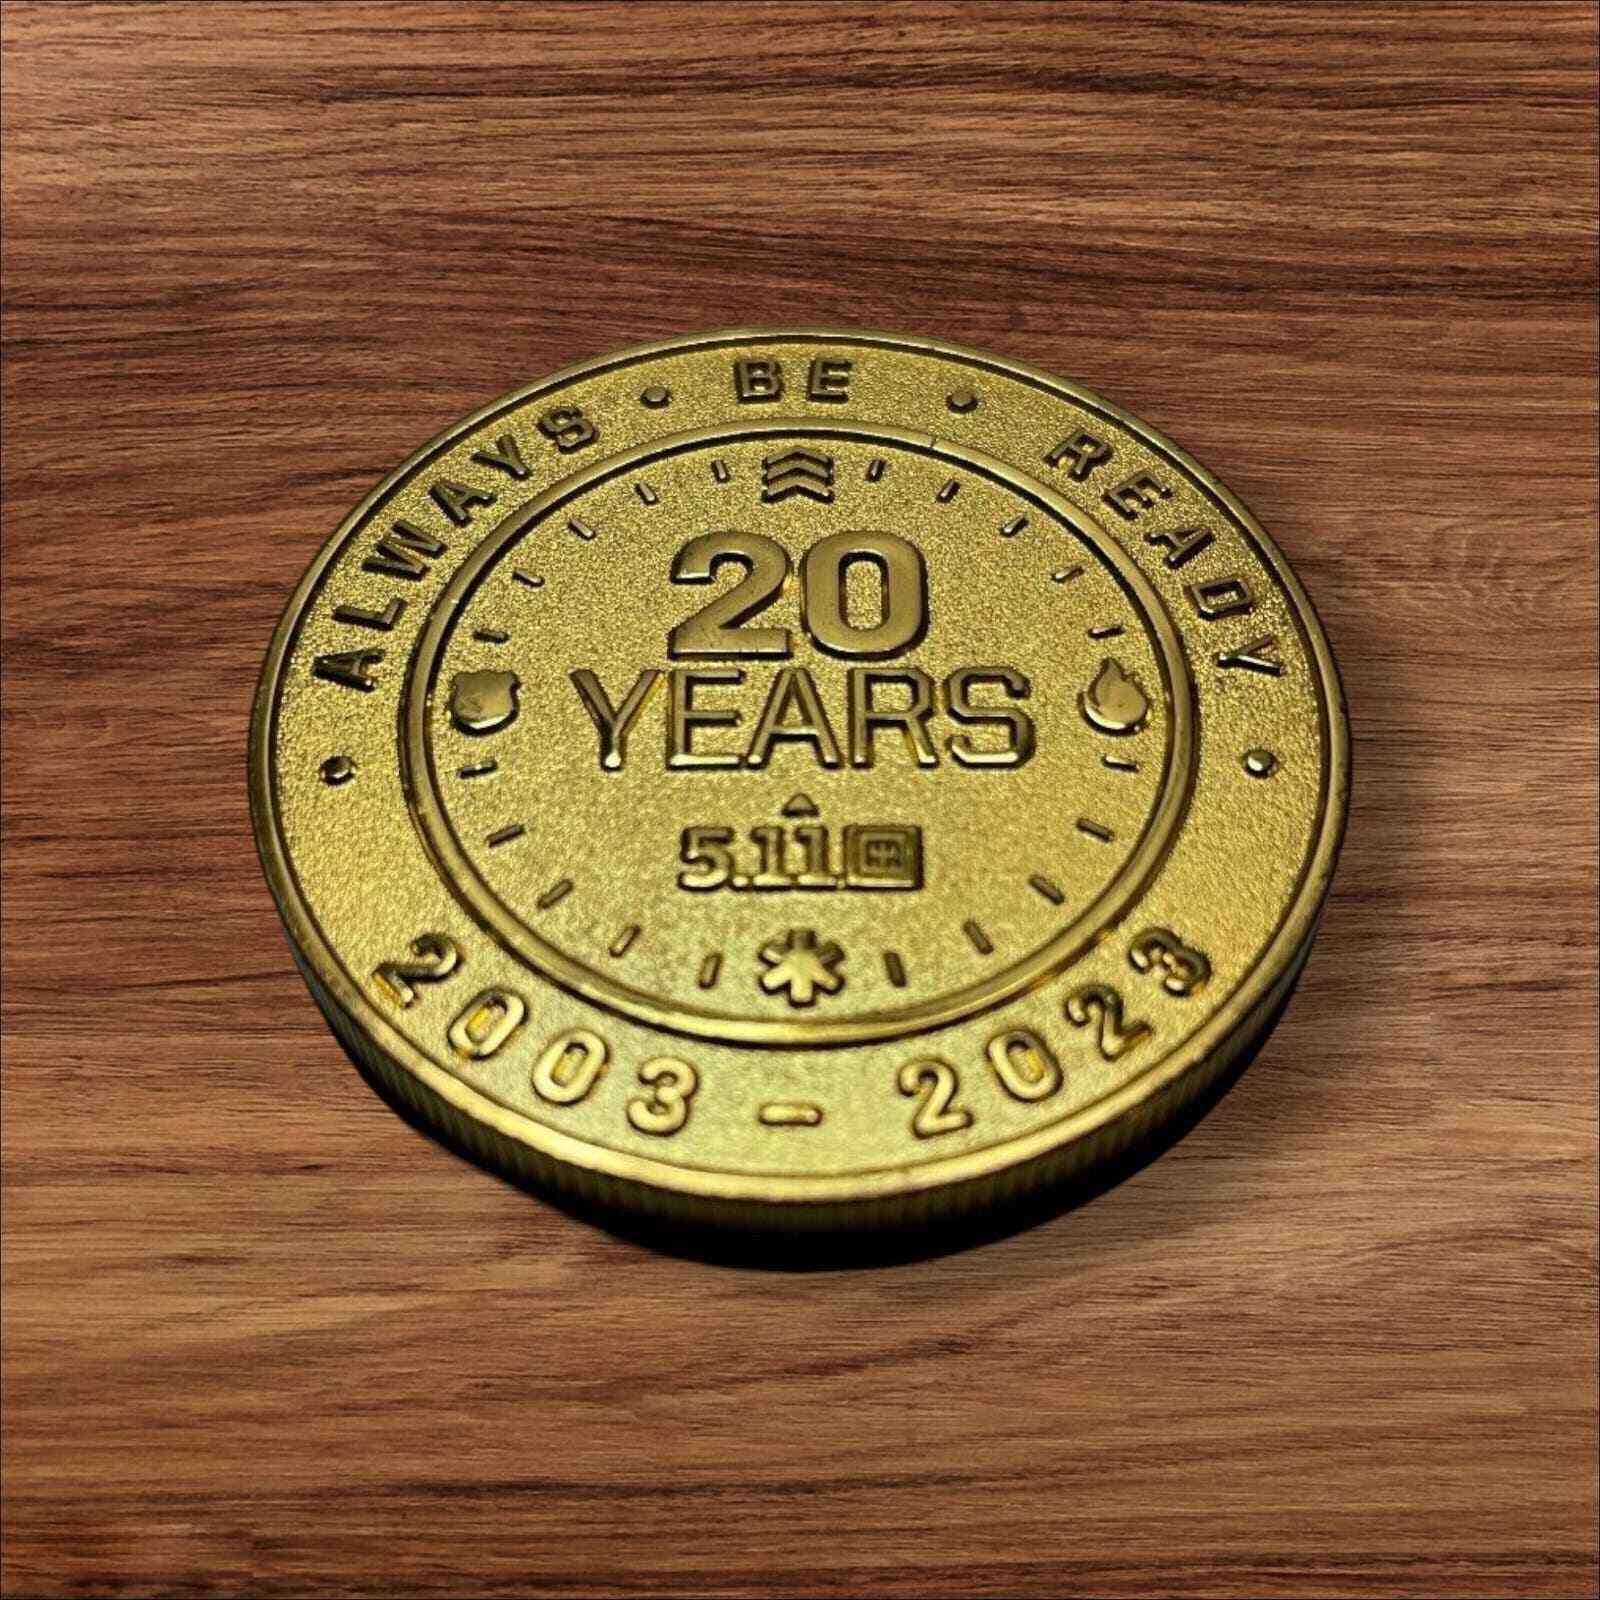 5.11 Tactical - 20 Year Anniversary - Challenge Coin - NEW